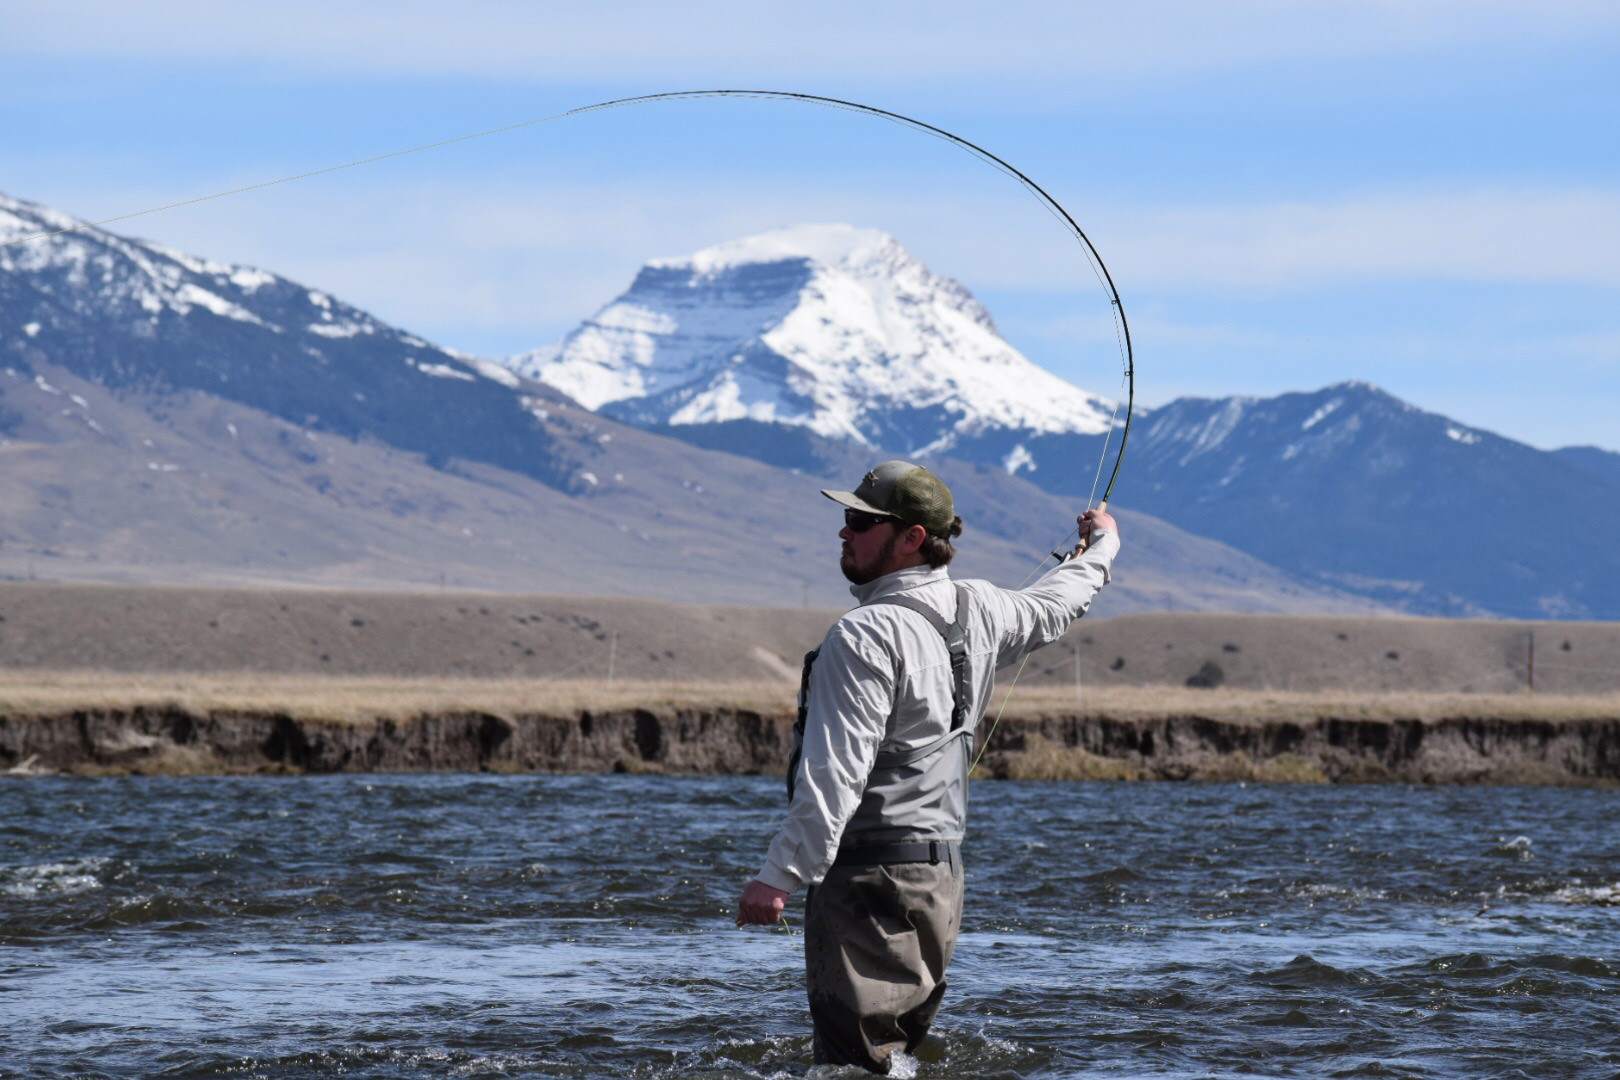 man wade fishing in river with mountain in background